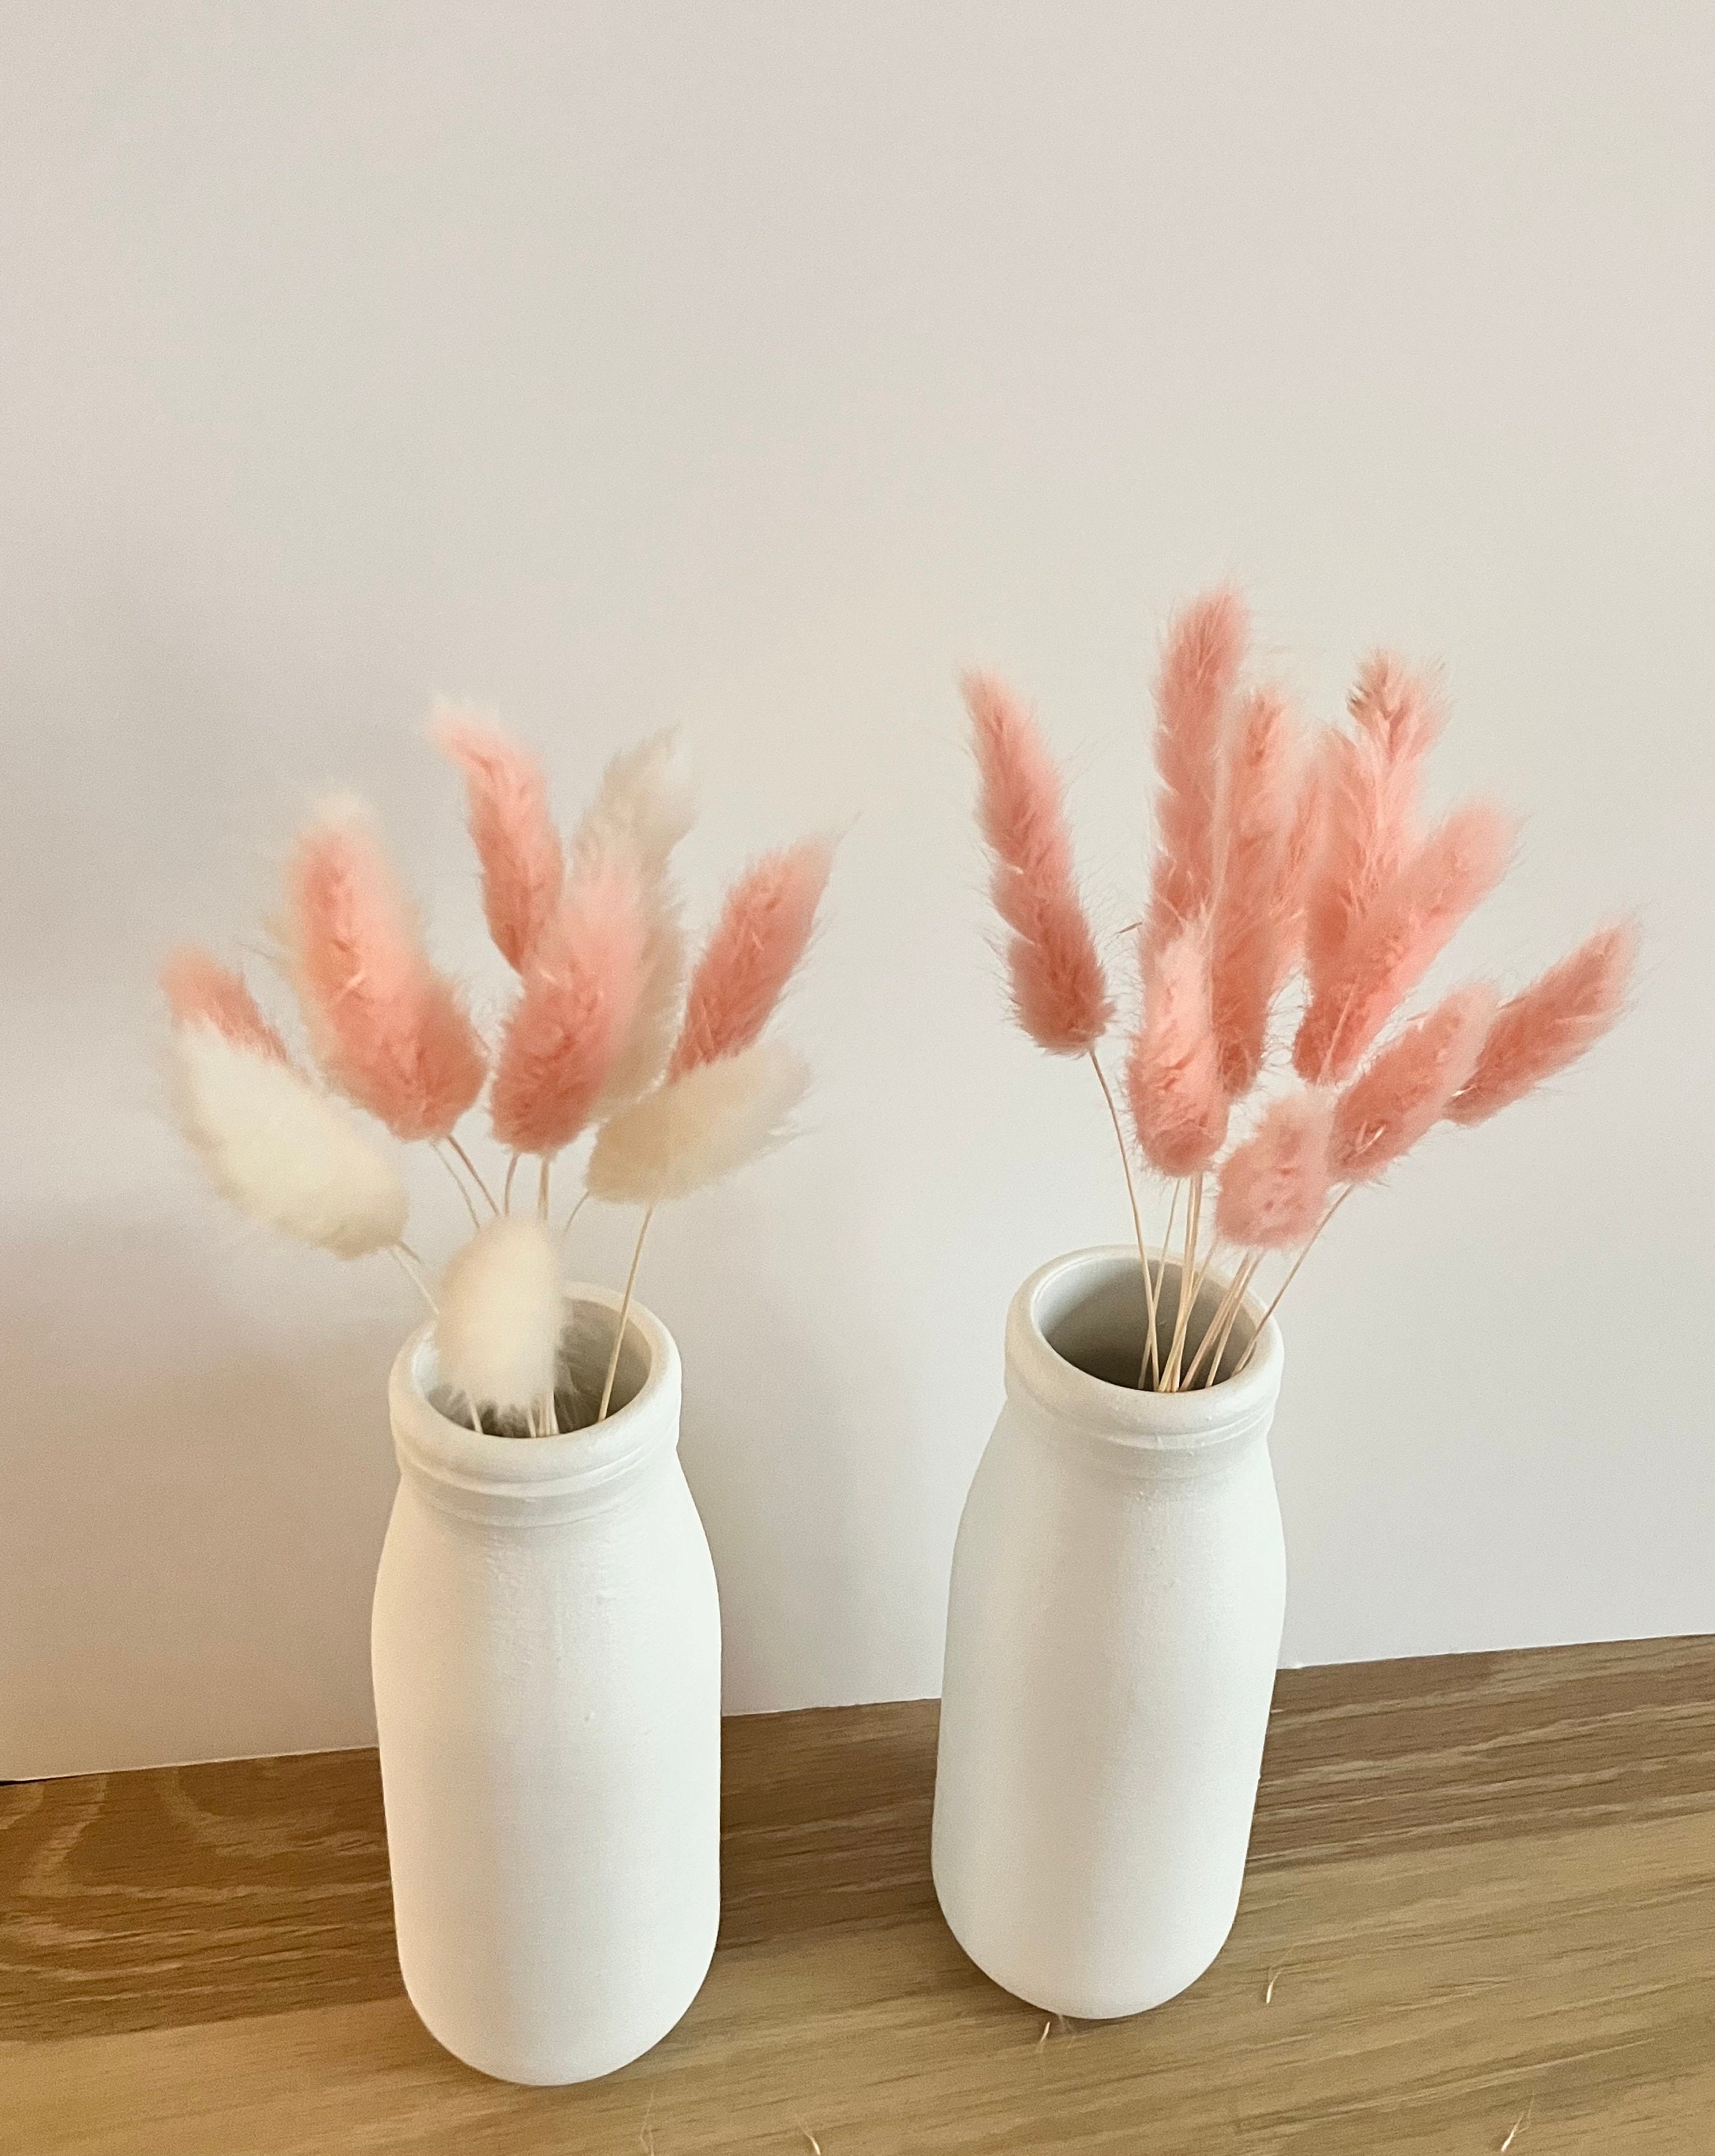 Mini Pink Flower Vase and Pink Dried Flowers, Dried Flowers Including  Pampas Grass Bunny Tails Gifts for Her, New Home Gift Mothers Day 